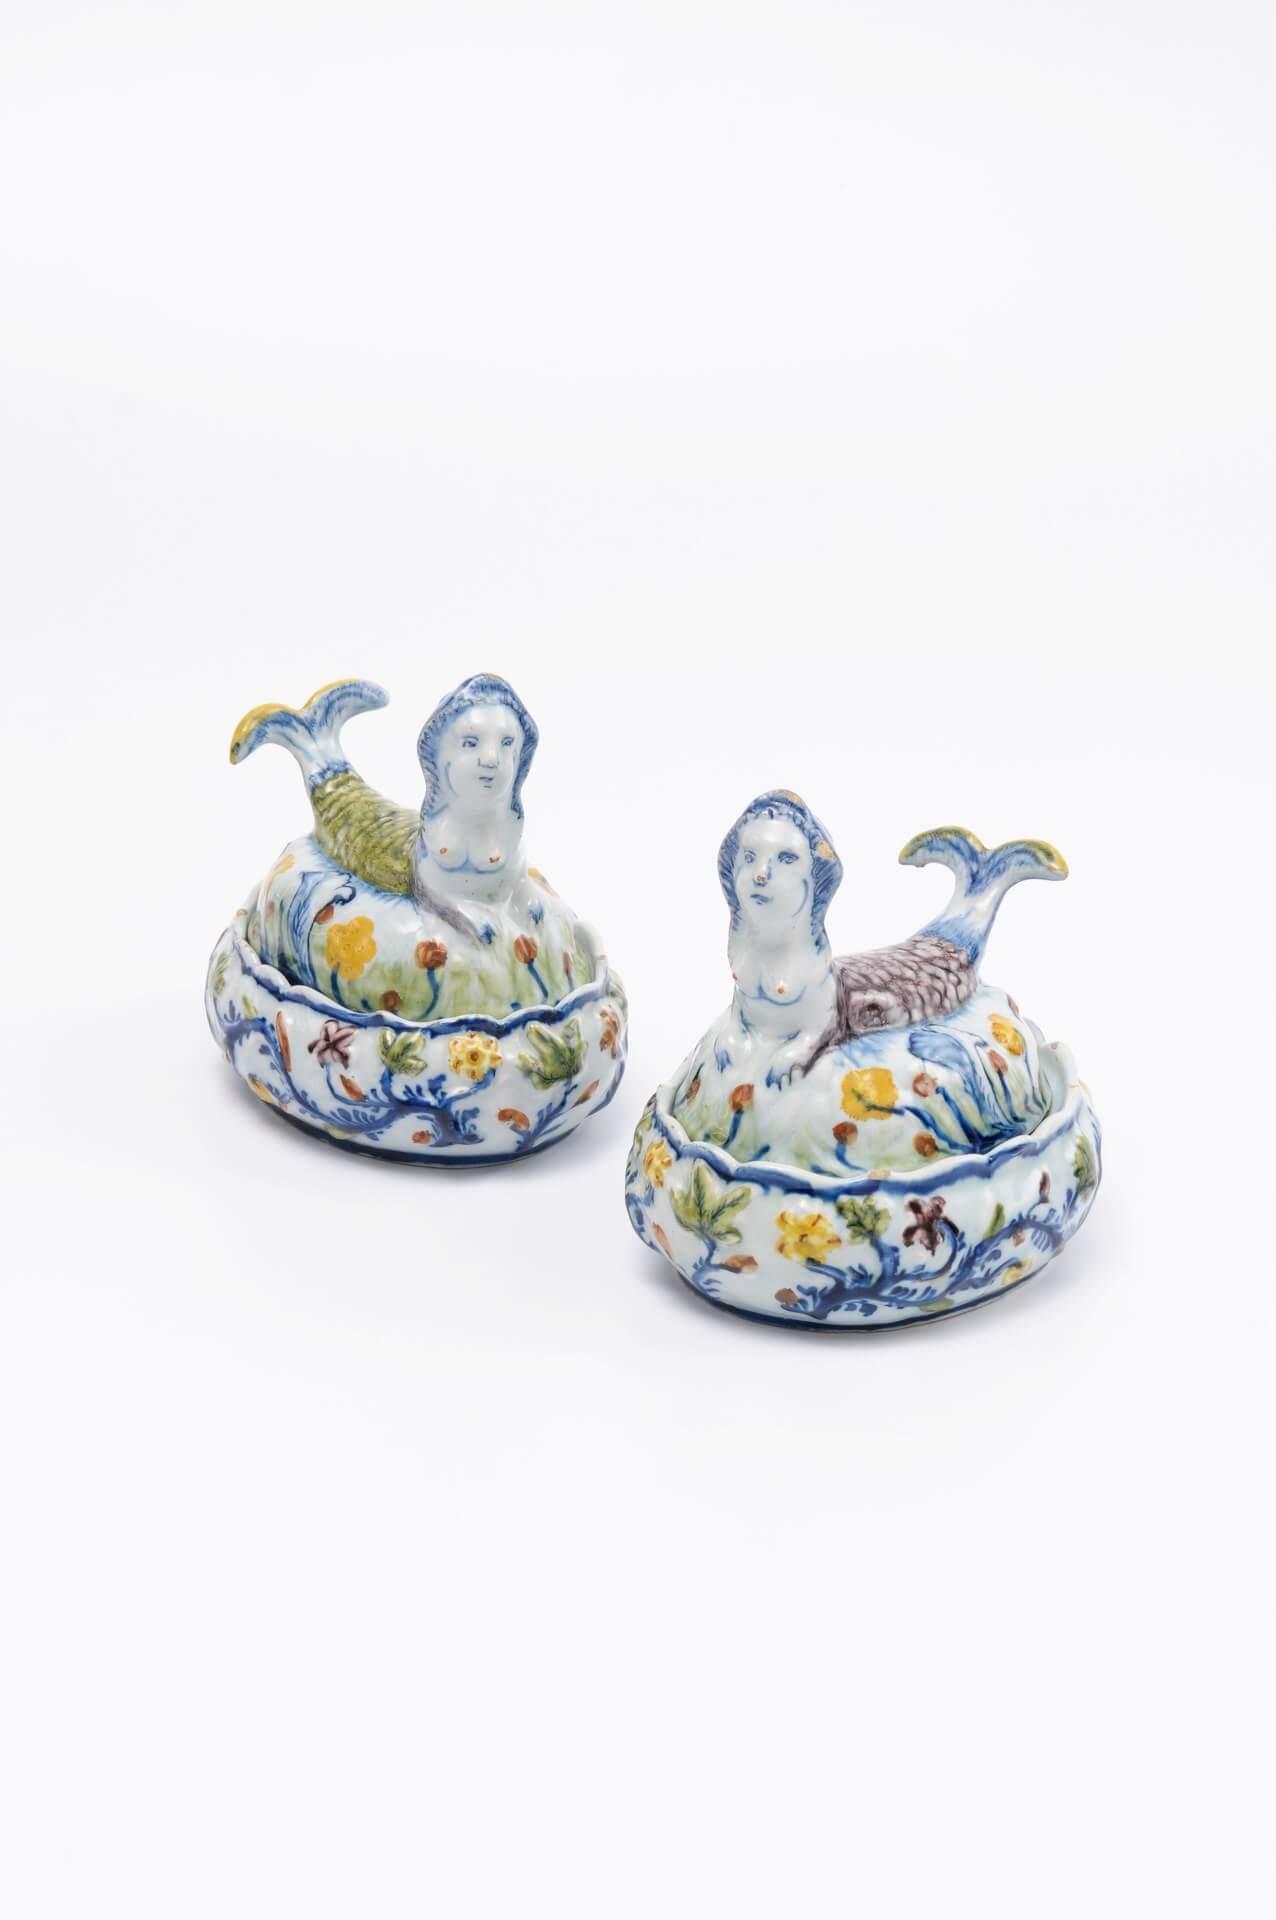 Dutch Delftware pottery polychrome mermaid form butter tubs